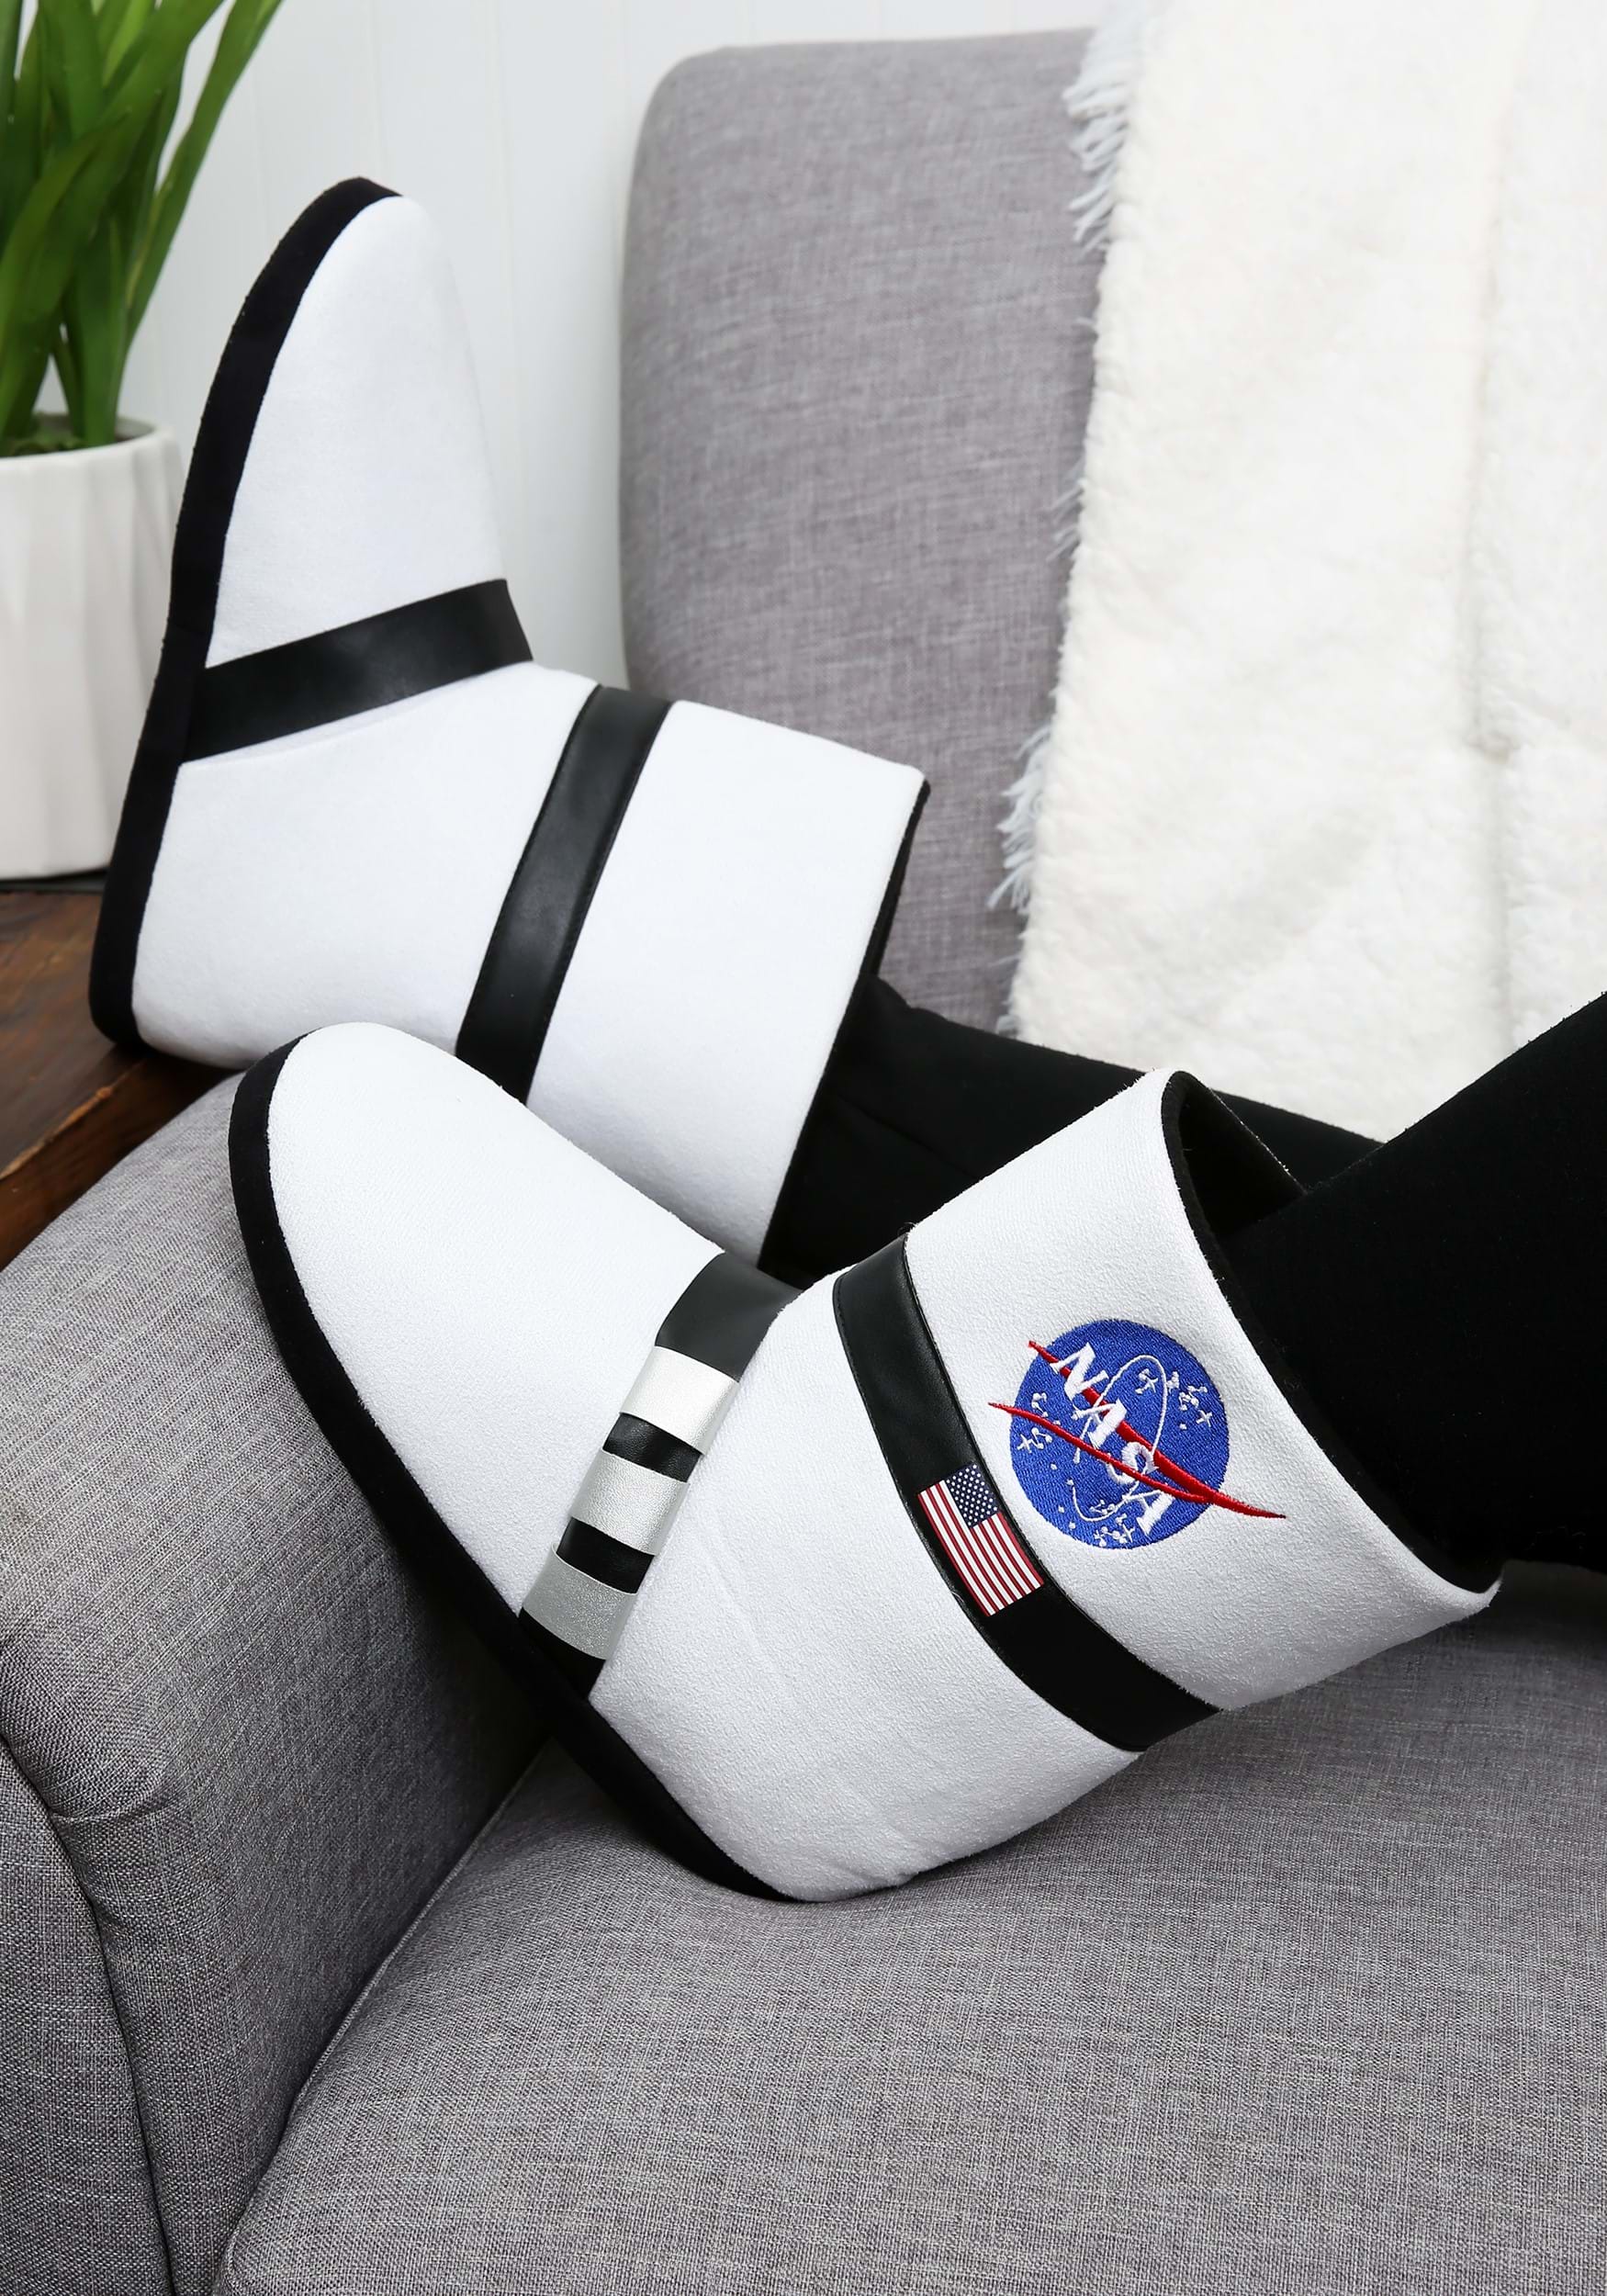 Adult NASA Astronaut Boot Slippers , Adult Slippers